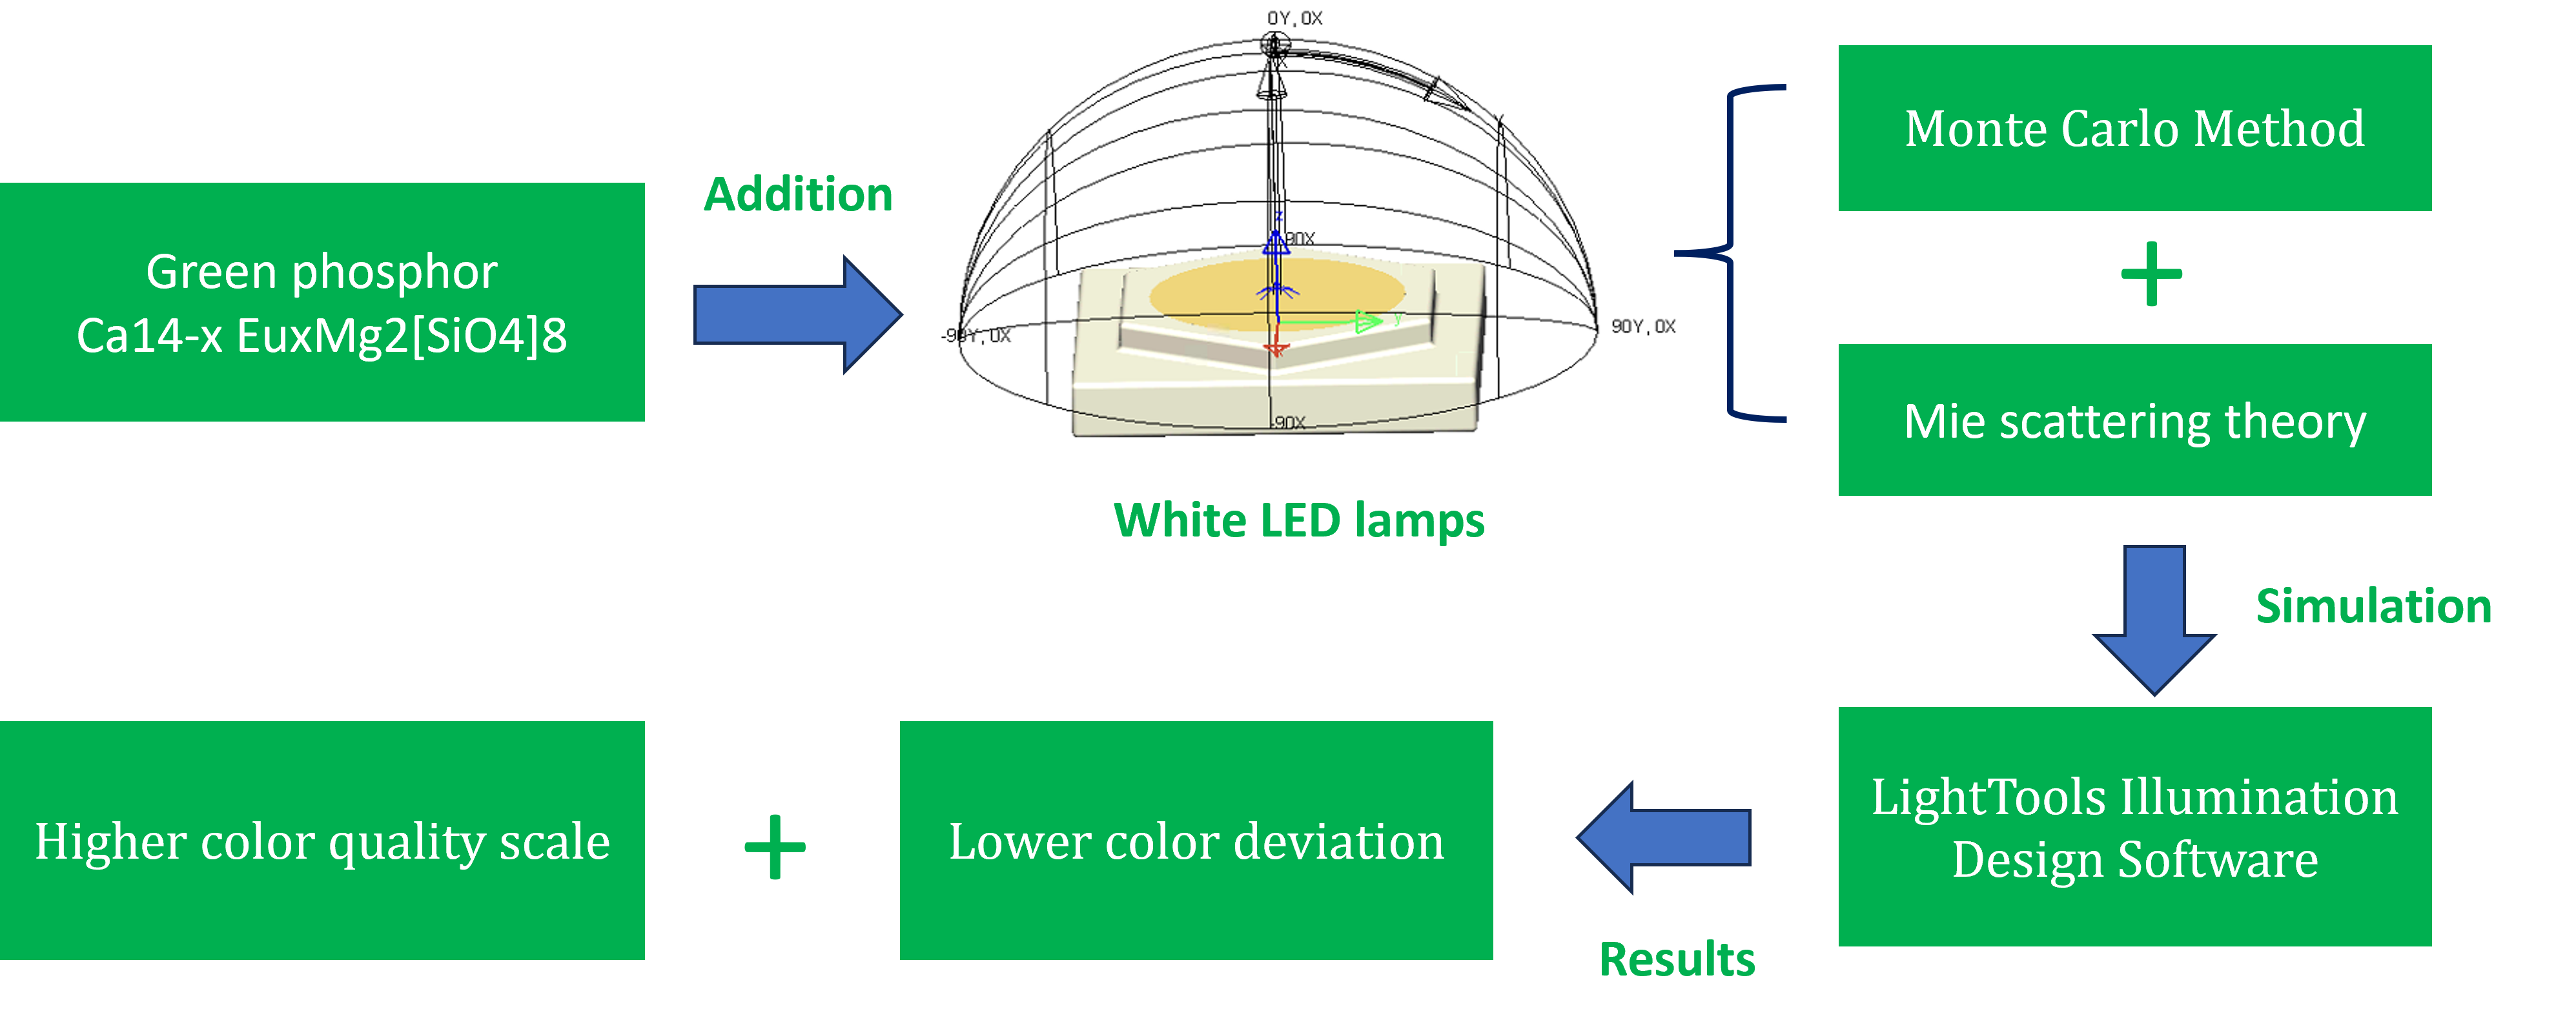 The Light Features and Bredigite Layout for Orthosilicate Phosphor in WLED Devices